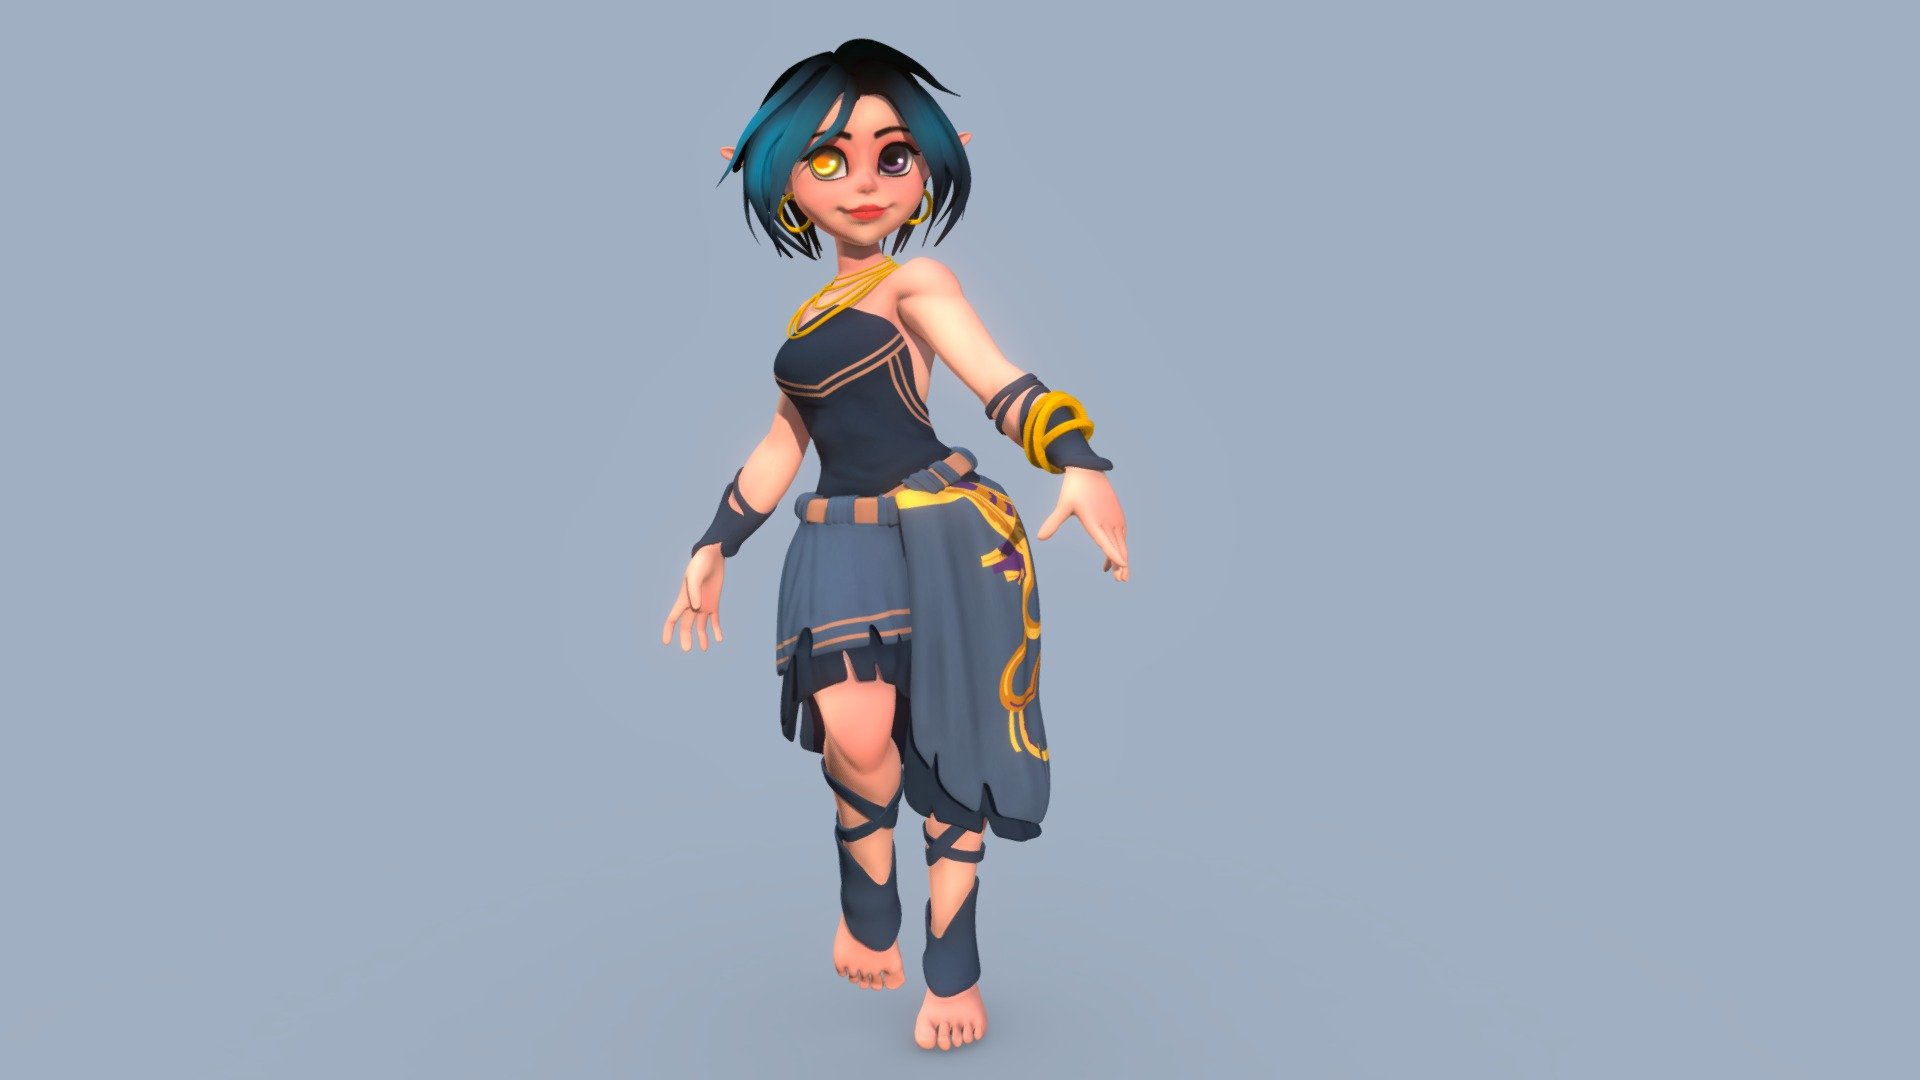 My fanart base on a great concept by Qifeng Lin (artstation). I loved the cuteness of this character and decided to make her in 3D.

Full details at my portfolio page: https://www.artstation.com/tuananhrobert - Oliver (fanart) - 3D model by tuananhrobert 3d model